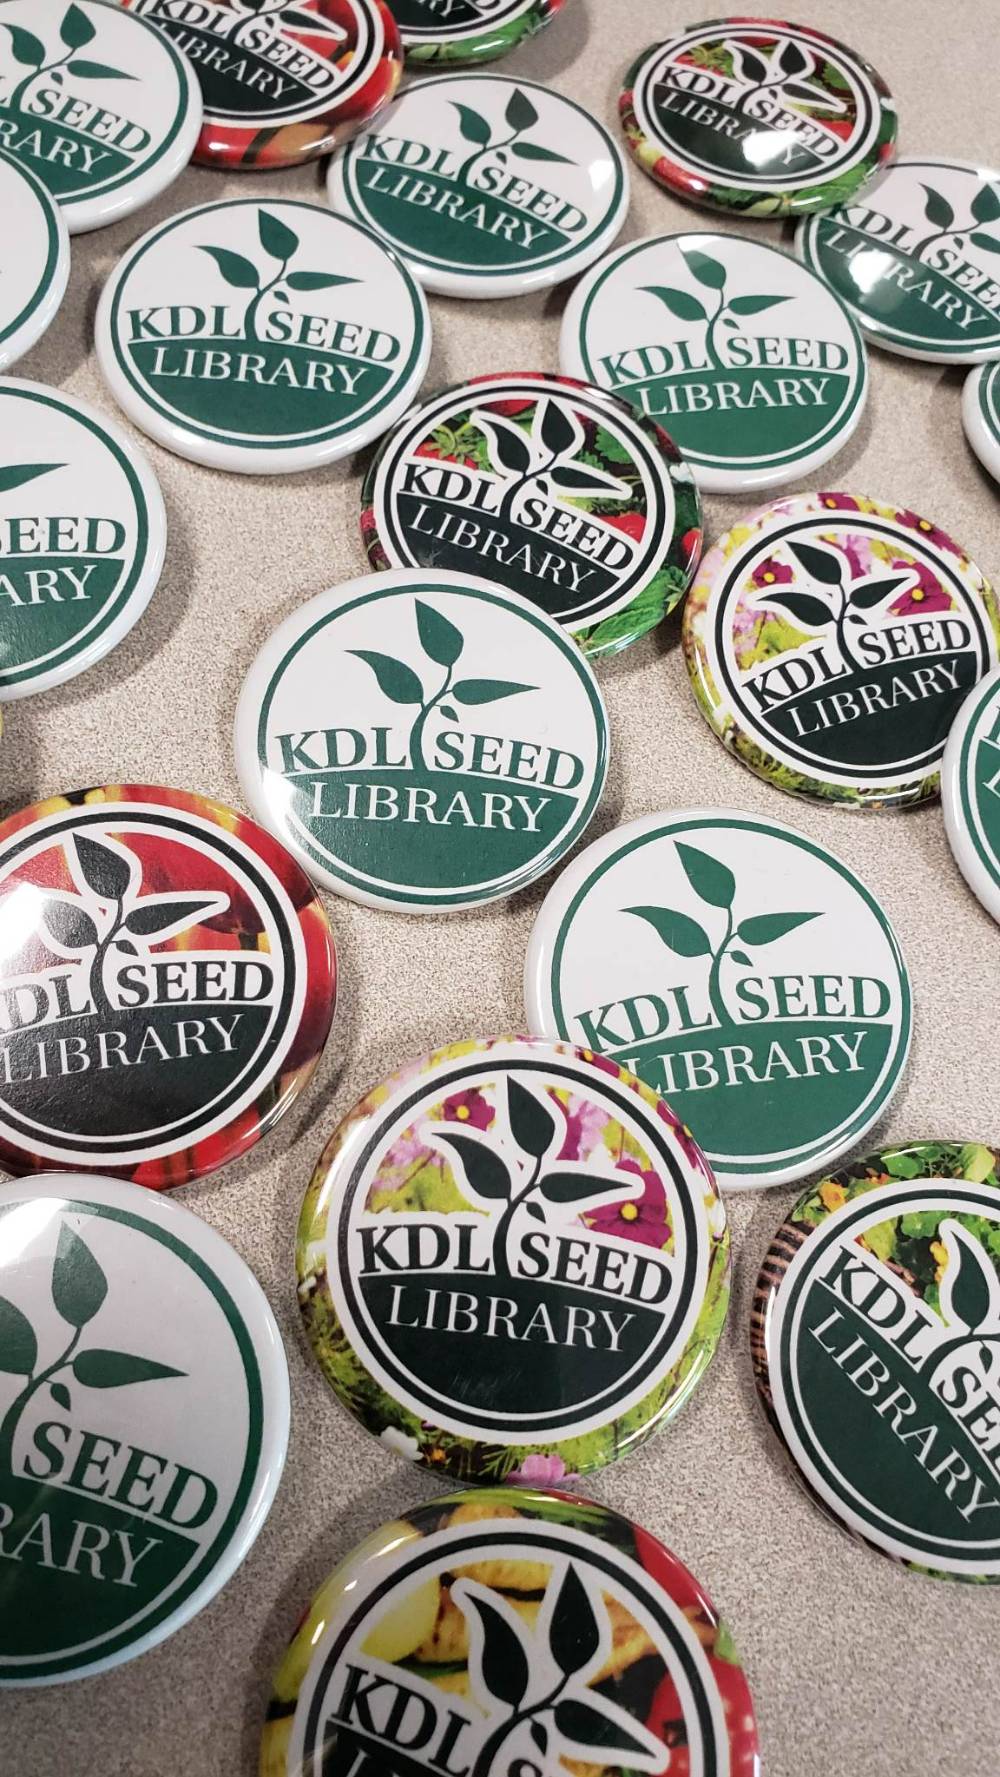 KDL Seed Library pins